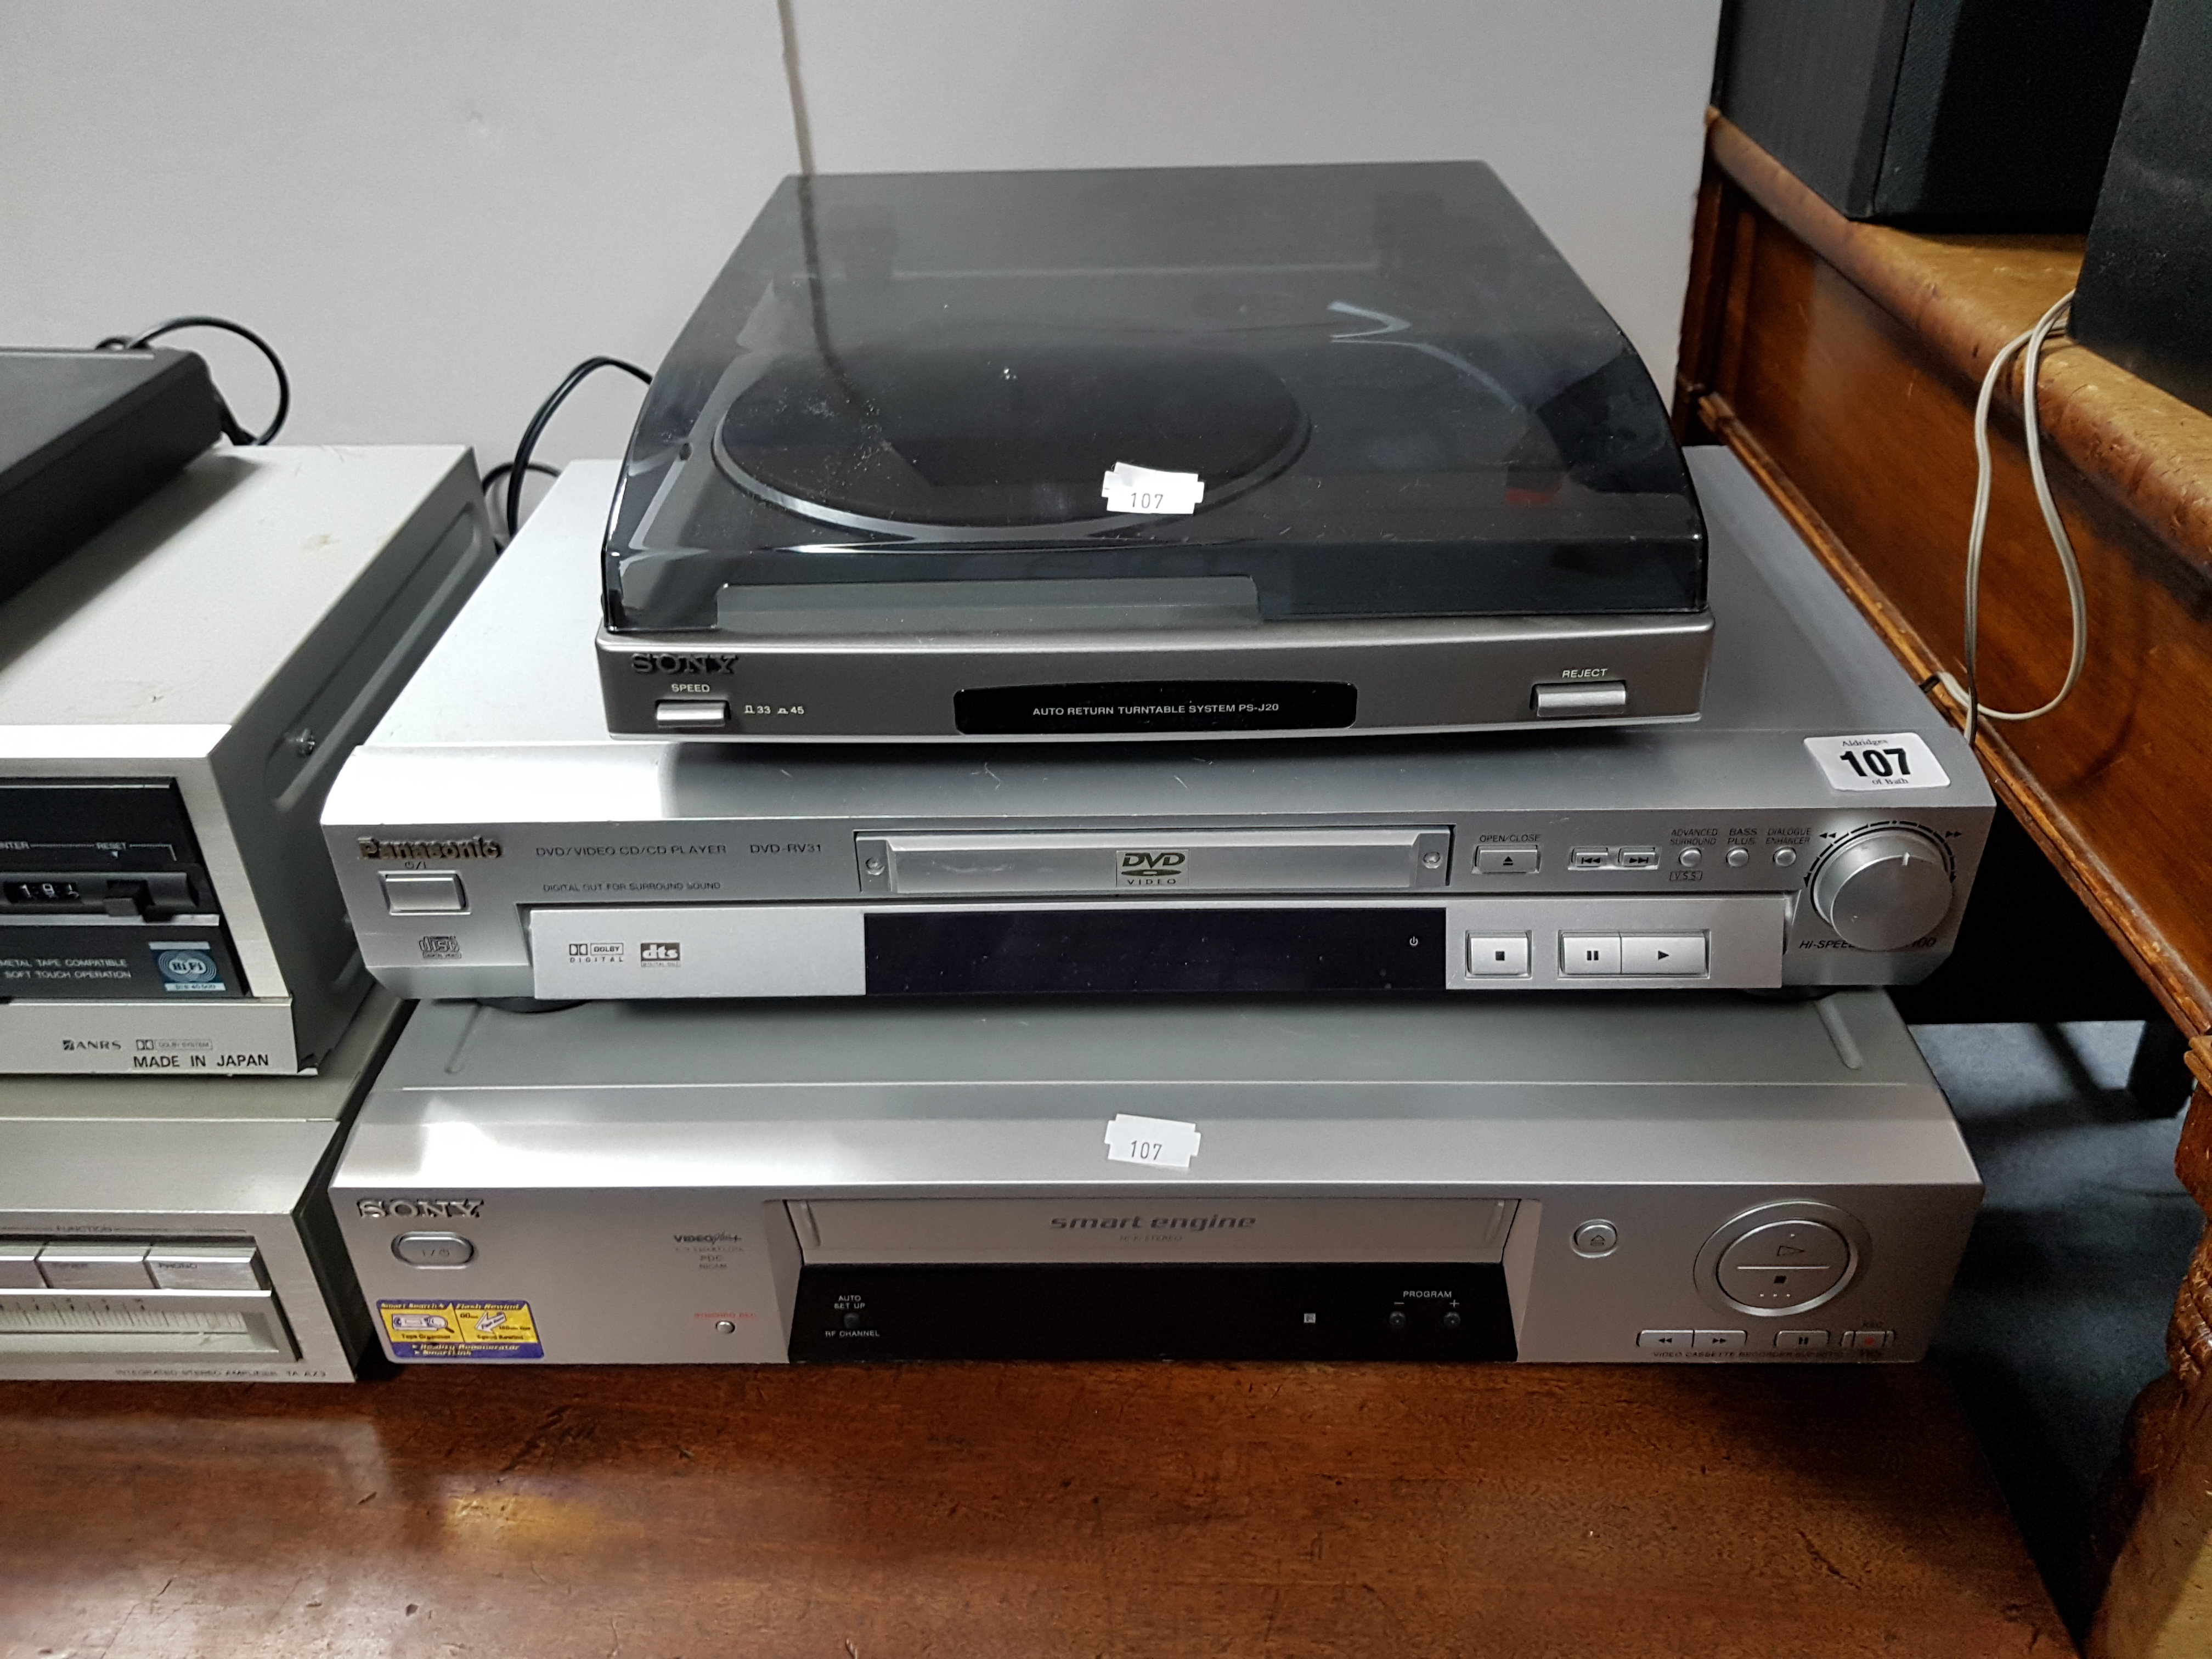 A Sony radio receiver; a Panasonic DVD player; a Sony turntable; a Sony video cassette recorder; & a